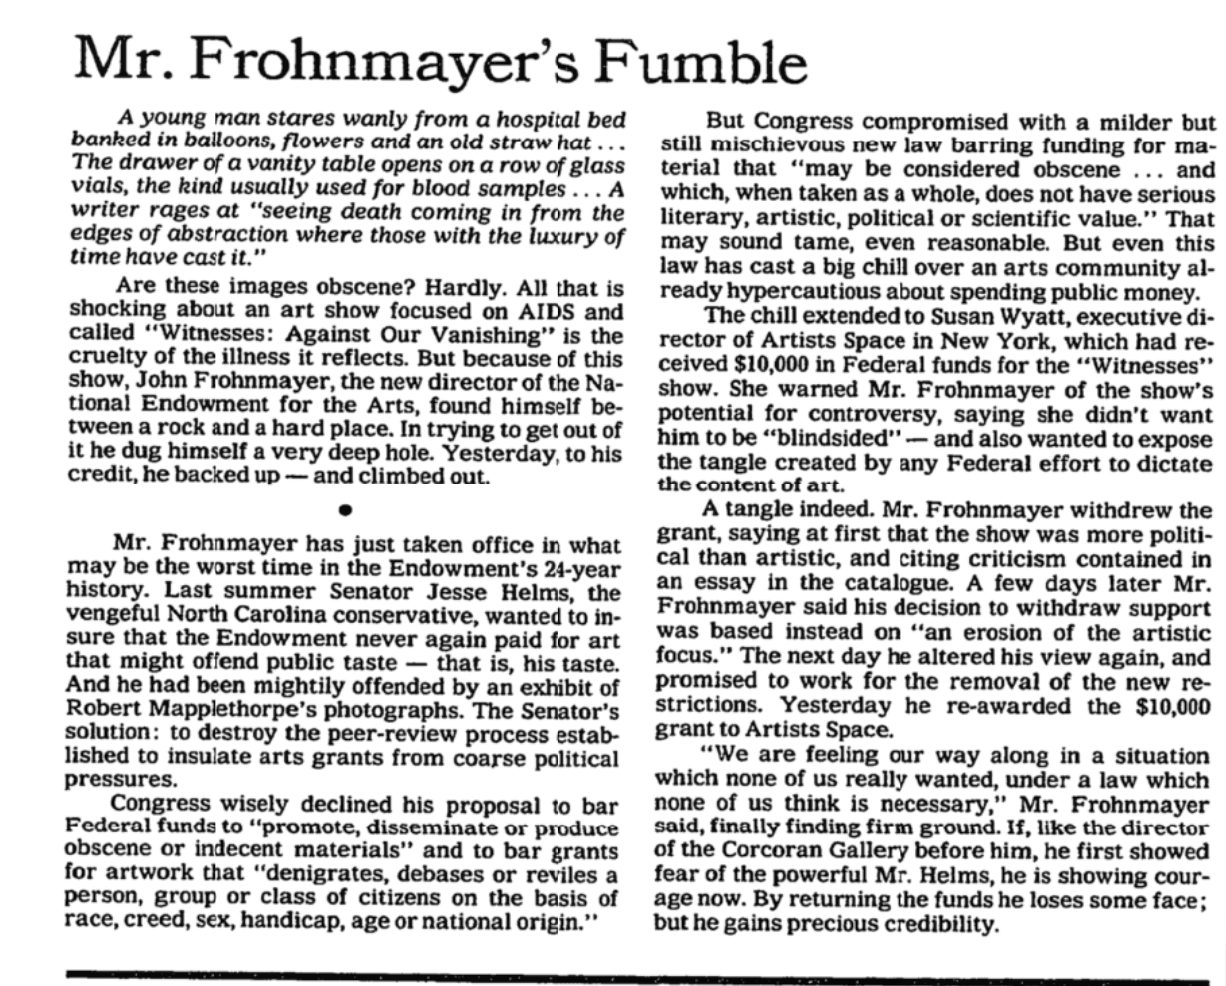 February 17, 1989 New York Times editorial on NEA Chairman Frohnmayer's decision to rescind and reinstate funding to Artists Space show